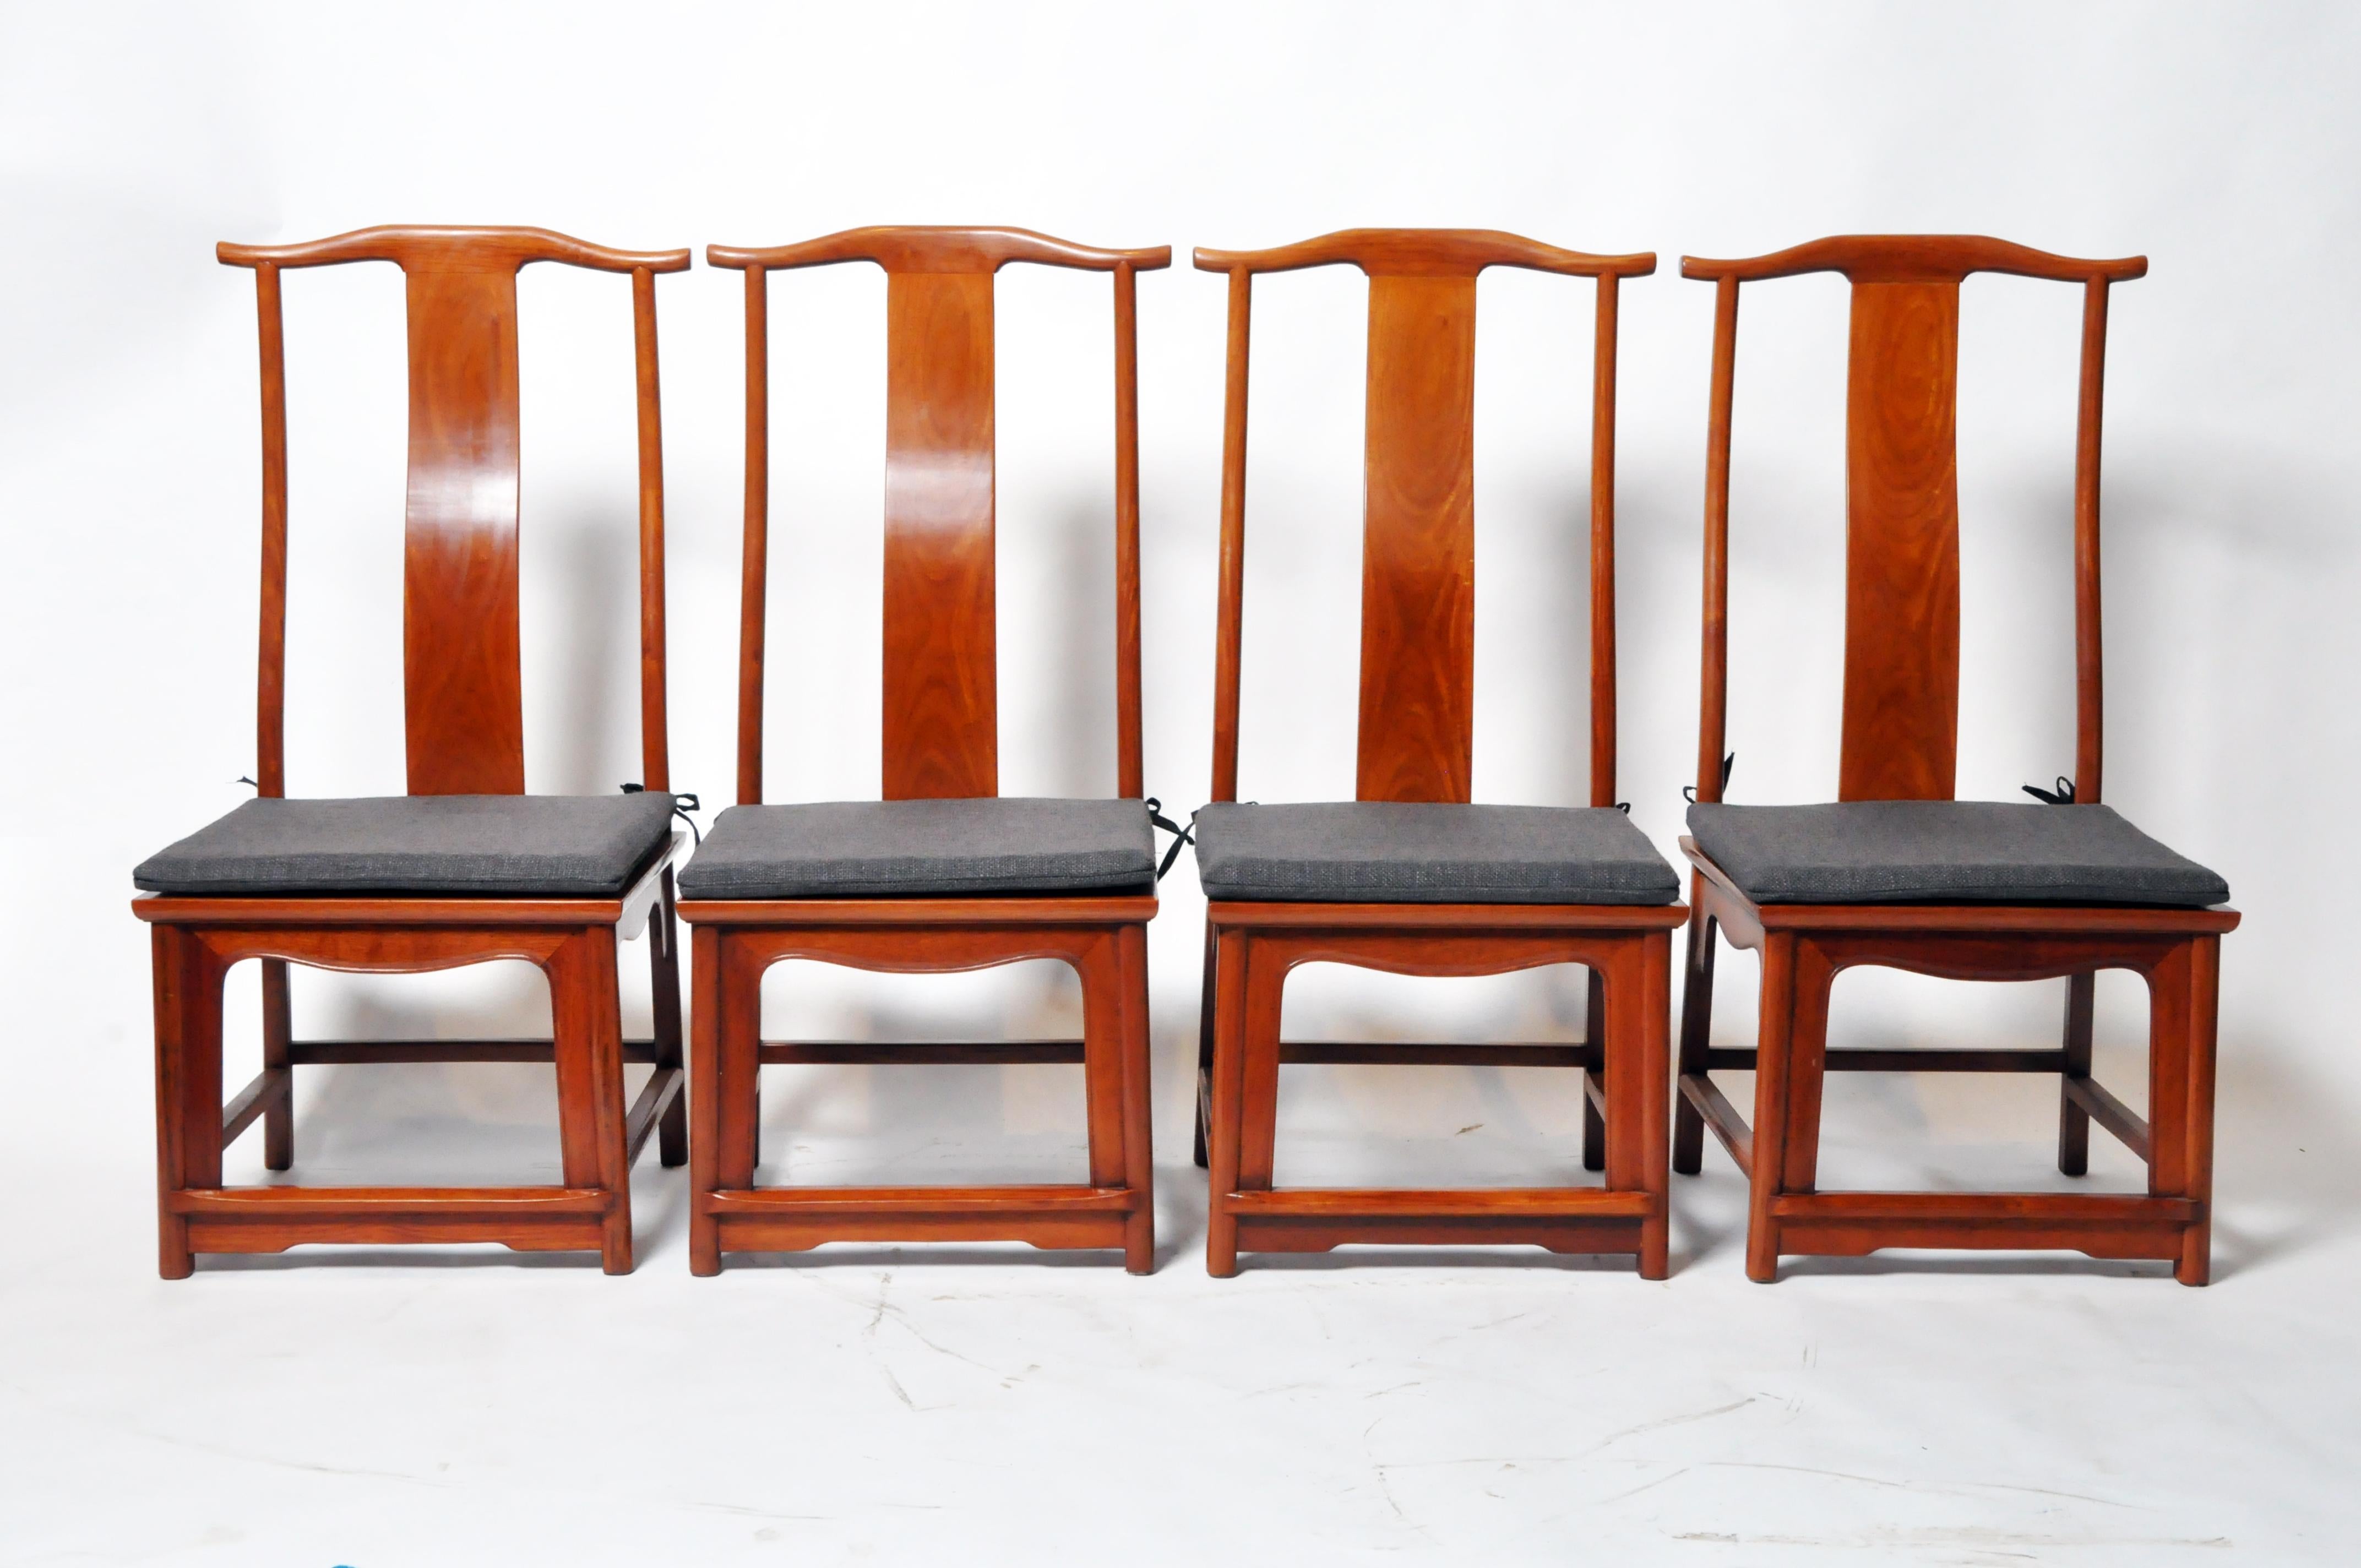 These contemporary Chinese chairs feature hardwood construction and elegant, traditional curved back splats for maximum comfort. The chairs are finished in a modern clear lacquer. They are somewhat lower than typical to allow for the addition of